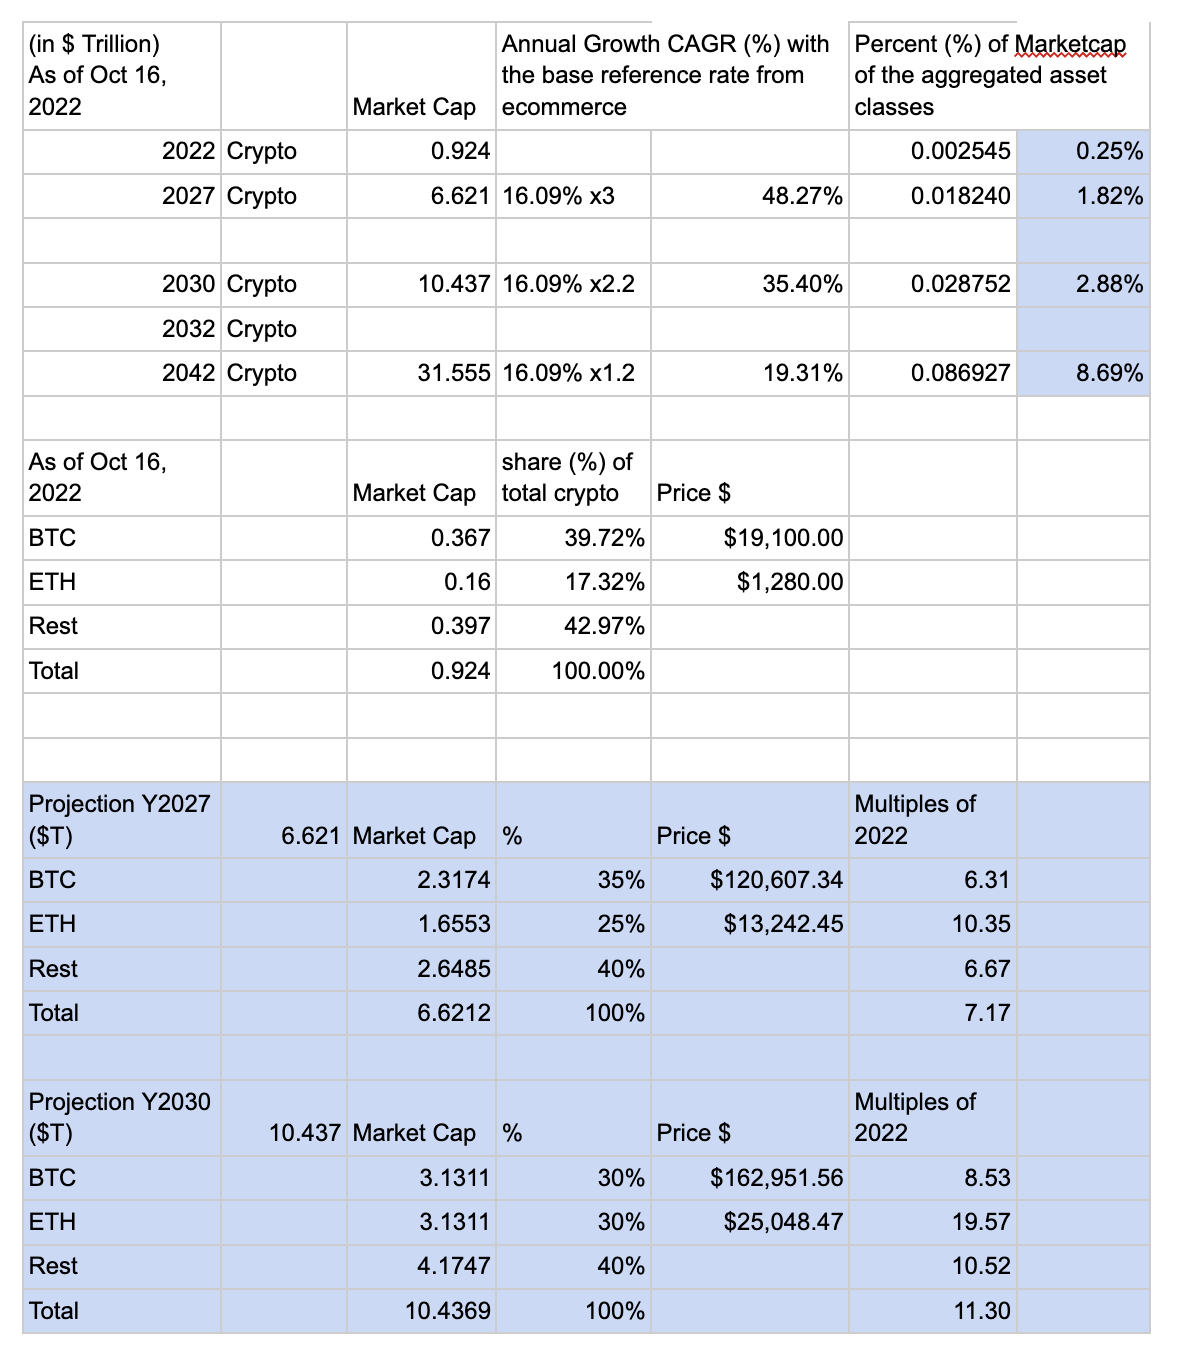 Crypto value projection for Y2027 and Y2030